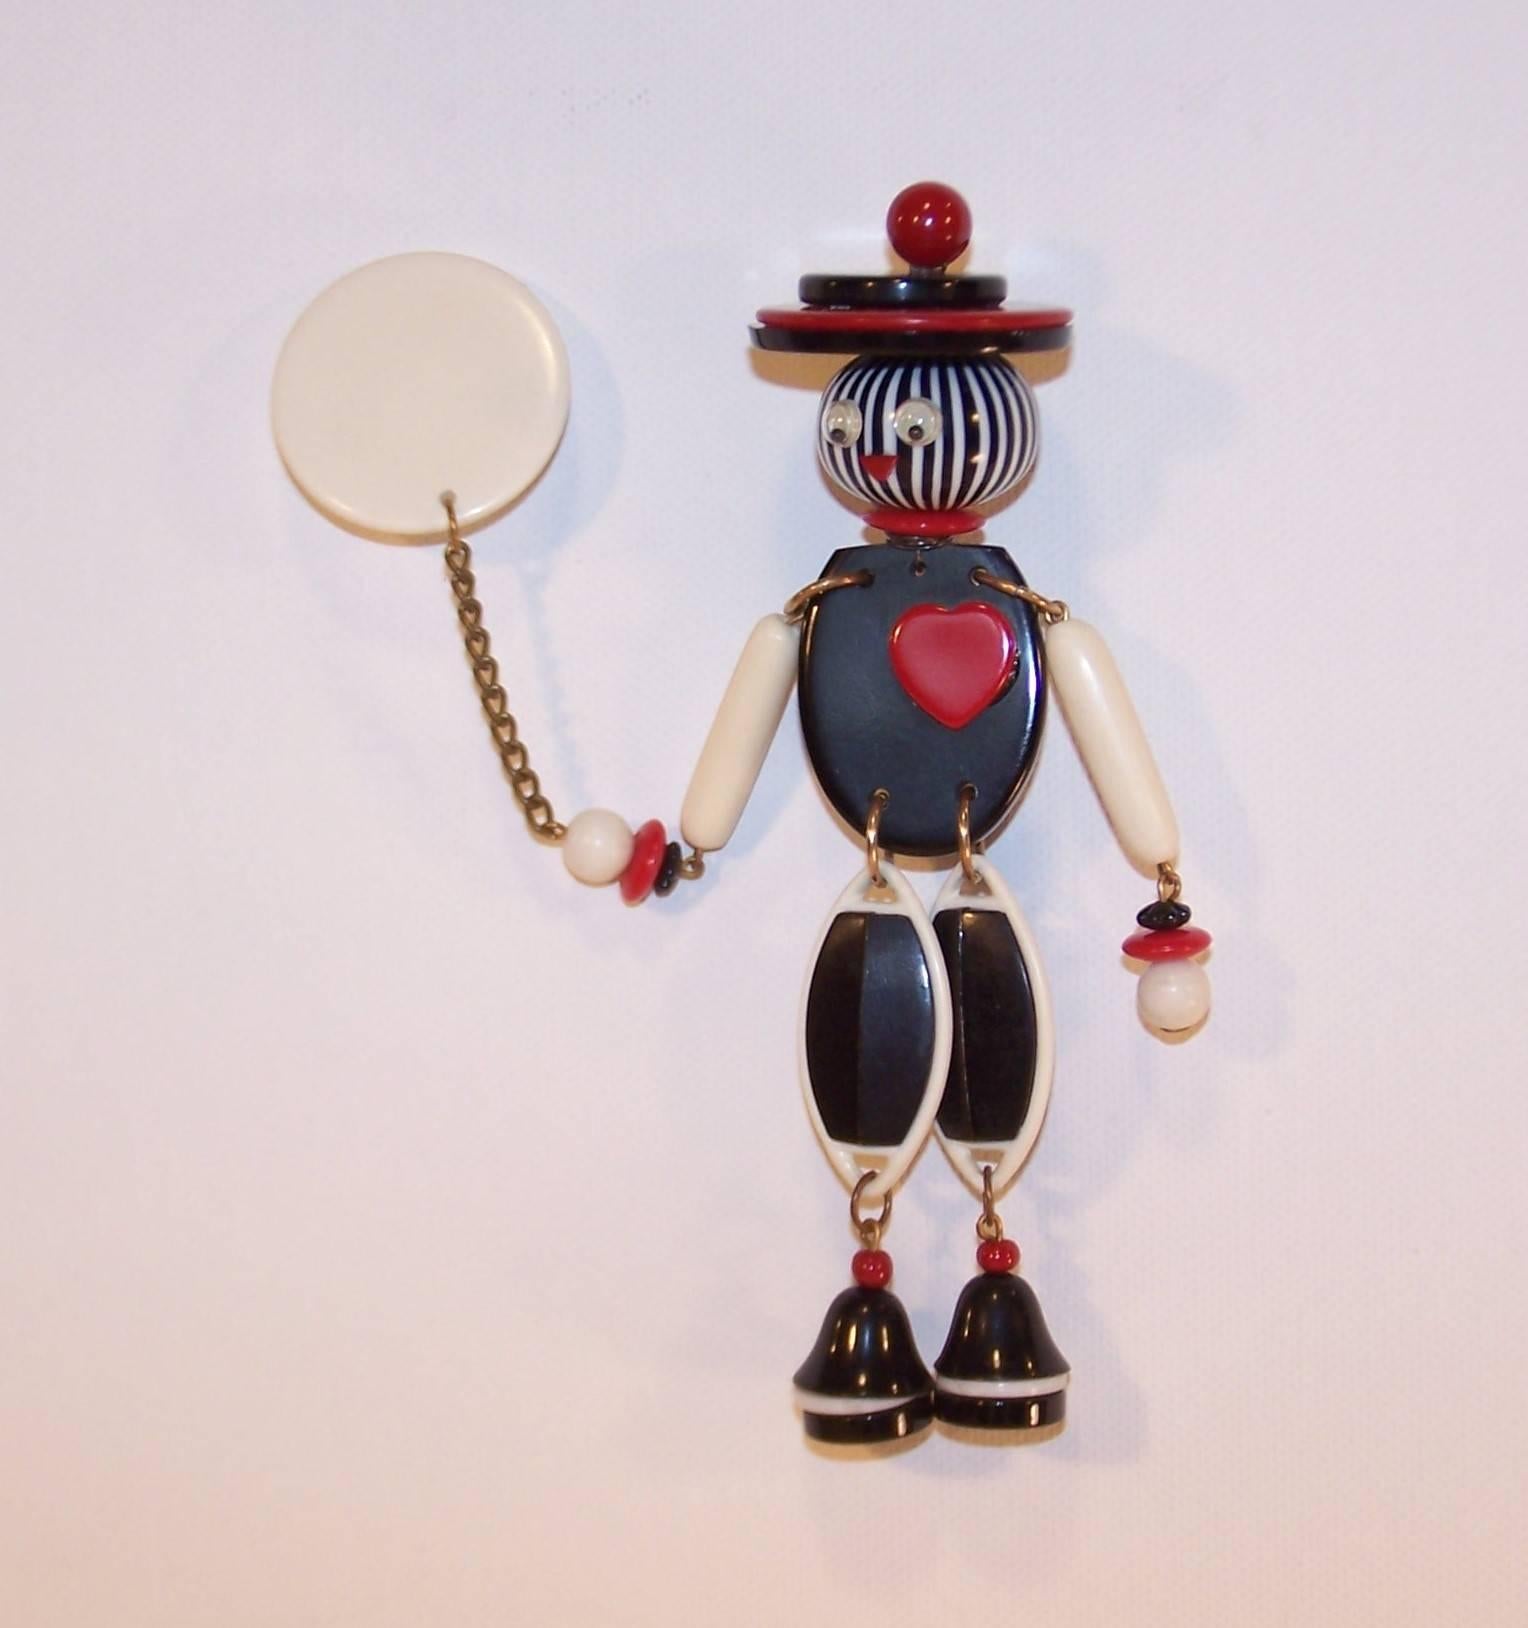 This little guy is loaded with fun loving personality!  The two part brooch consists of a disc balloon pin attached by a chain to an articulated man.  Both parts are designed with black, white and red bakelite with plastic segments secured by metal